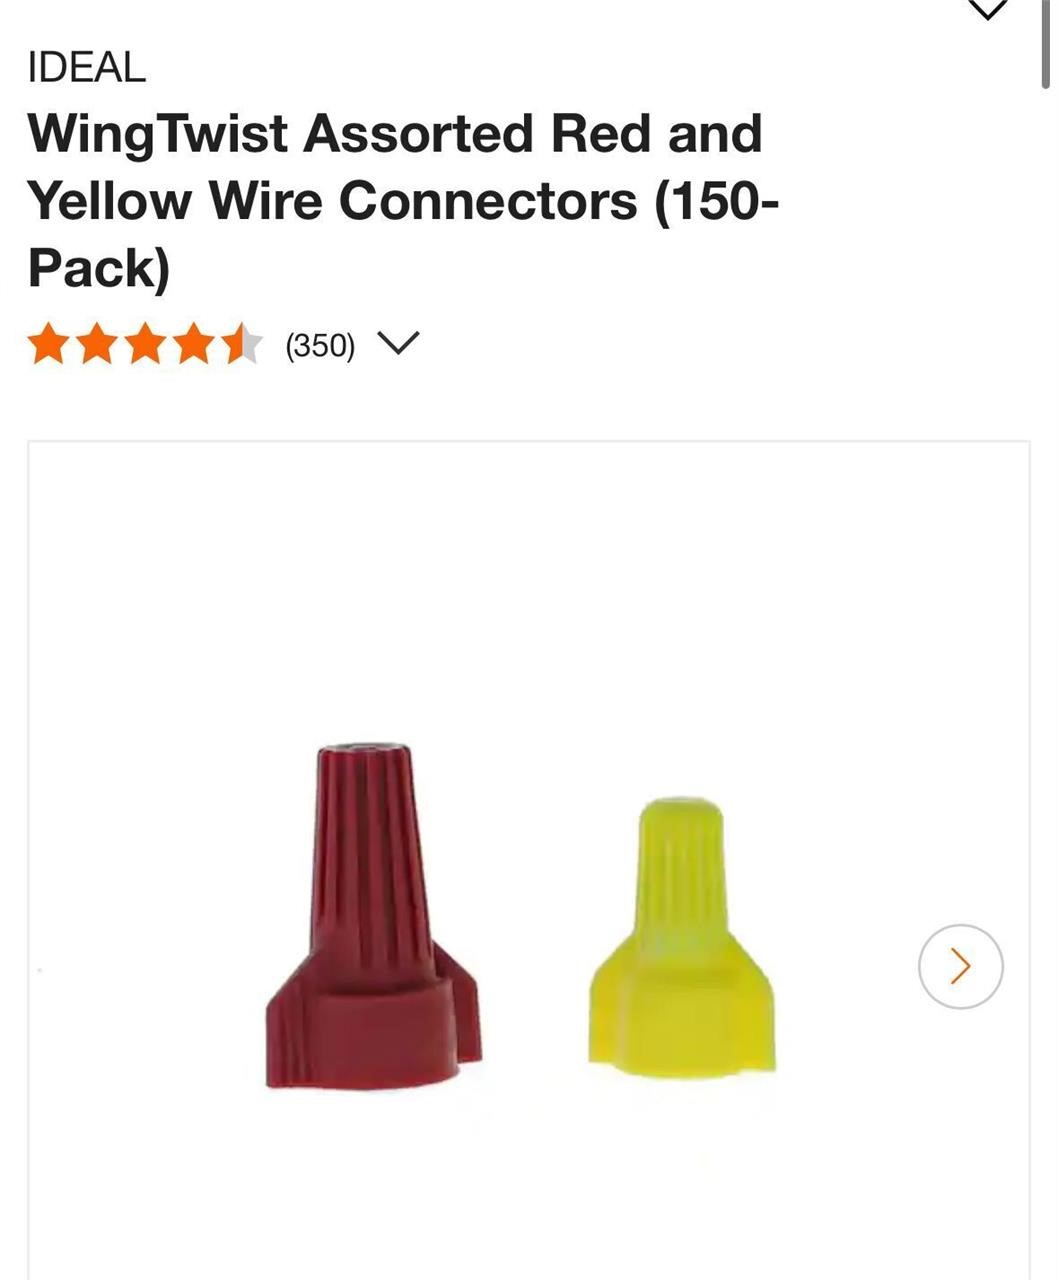 Wing Twist Assorted Red and Yellow Wire Connectors